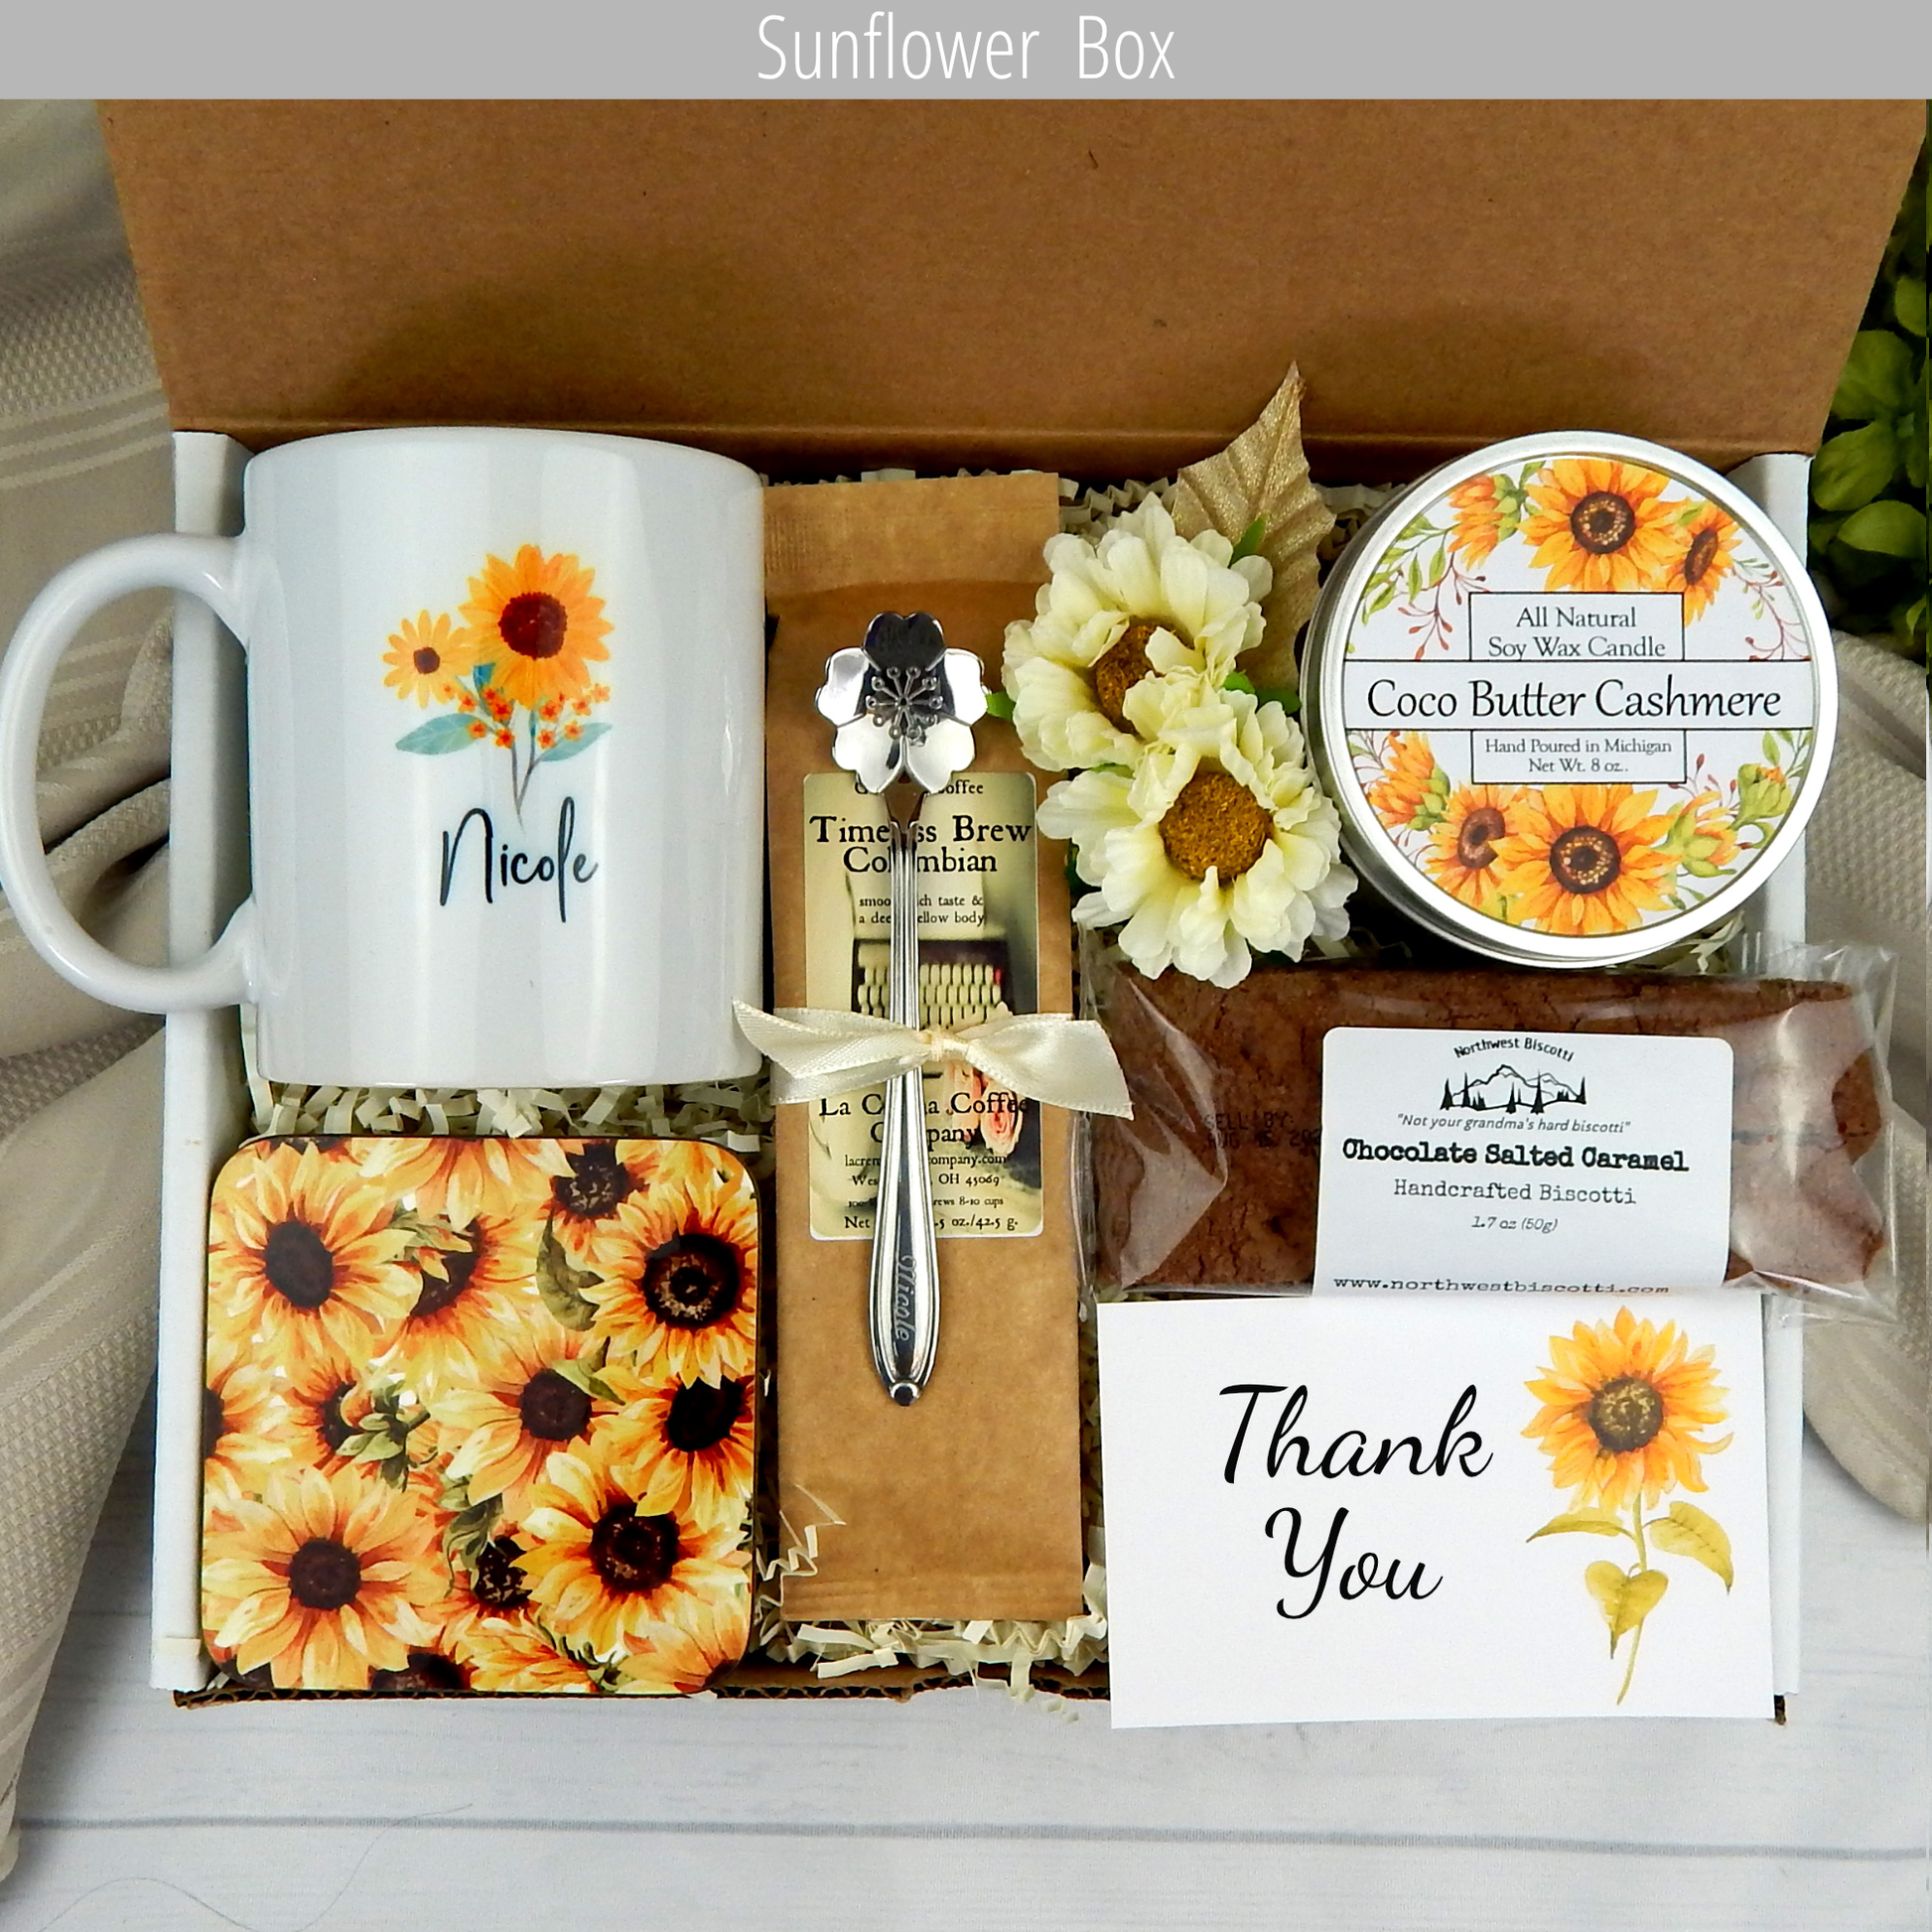 sunflower themed thank you gift basket with sunflower personalized mug, coffee, biscotti and candle.